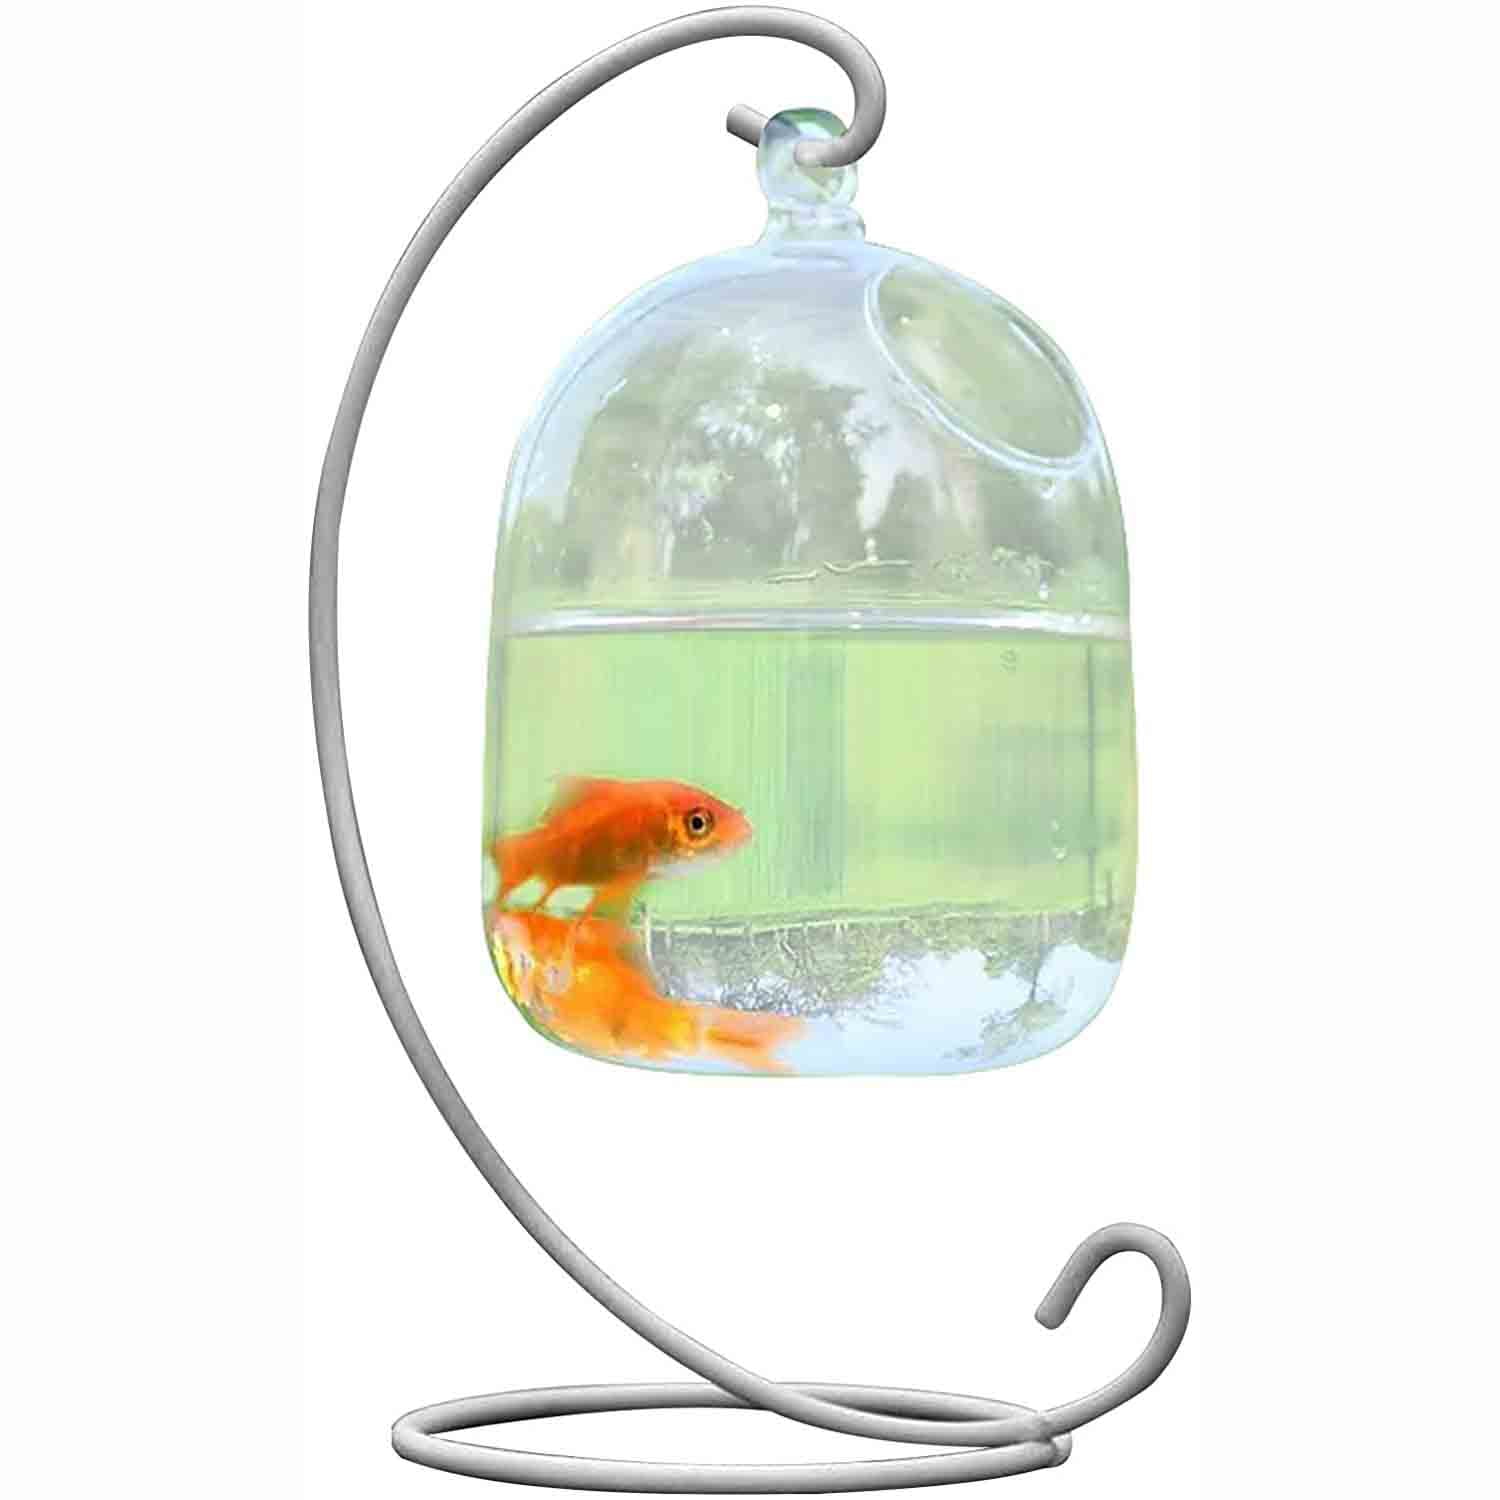 Desk Hanging Fish Tank, Small Glass Betta Fish Bowl Mini Aquarium with Stand,  Clear Plant Terrarium for Home Table Top Office Garden Decor 